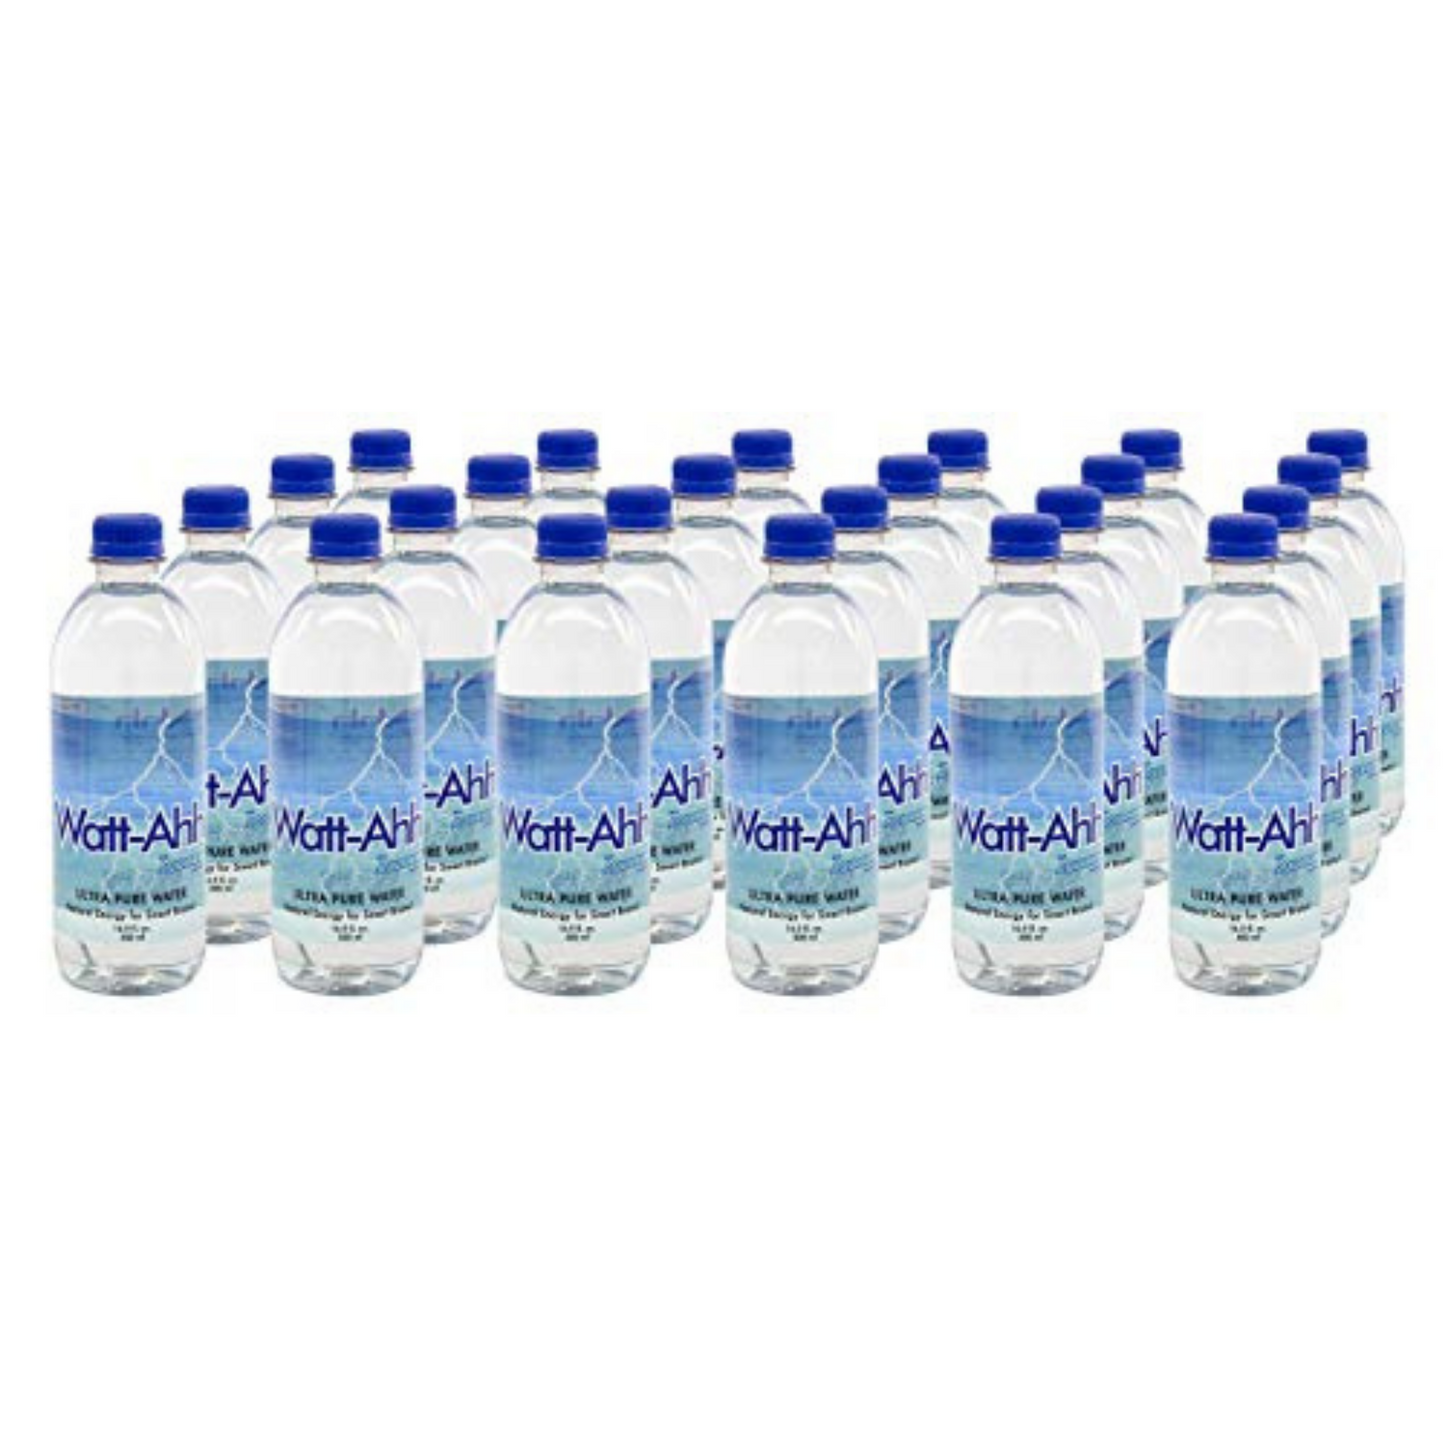 AquaNew’s Watt-Ahh – Premium Polarized Water for Energy and Health – Case of 24 – 16.9 Oz. Bottles